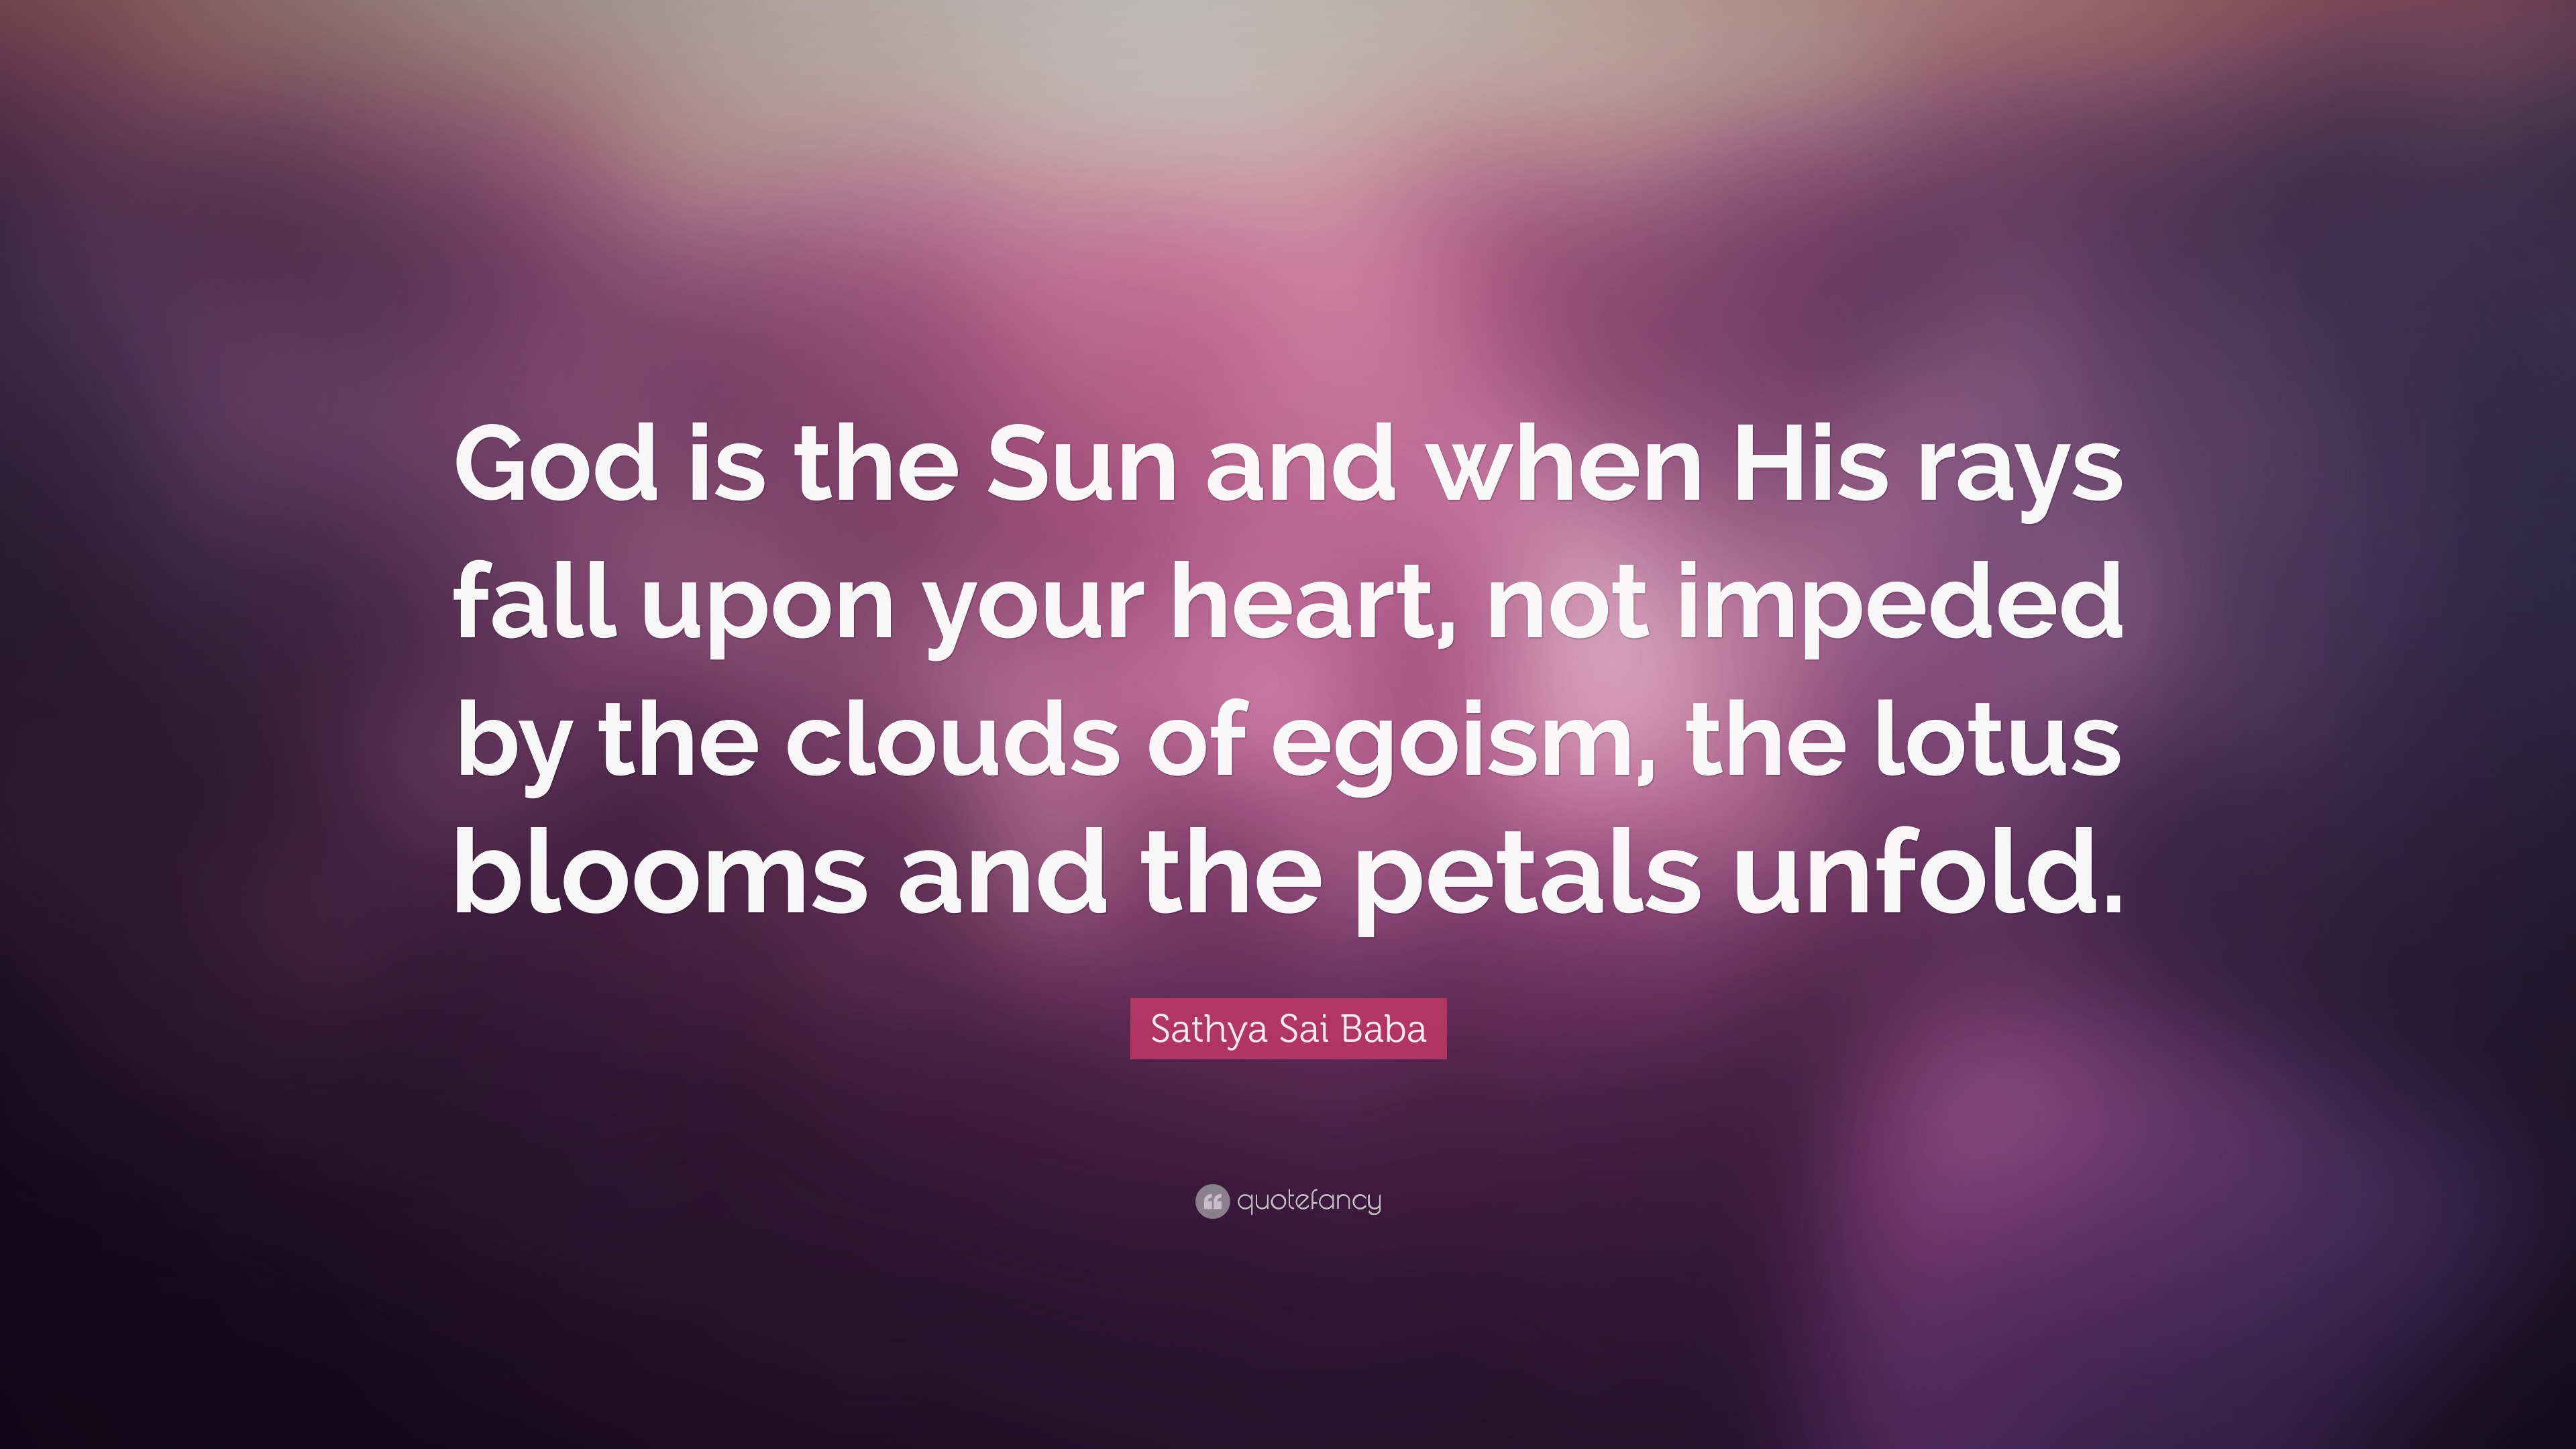 Sathya Sai Baba Quote: “God is the Sun and when His rays fall upon your  heart, not impeded by the clouds of egoism, the lotus blooms and the pet...”